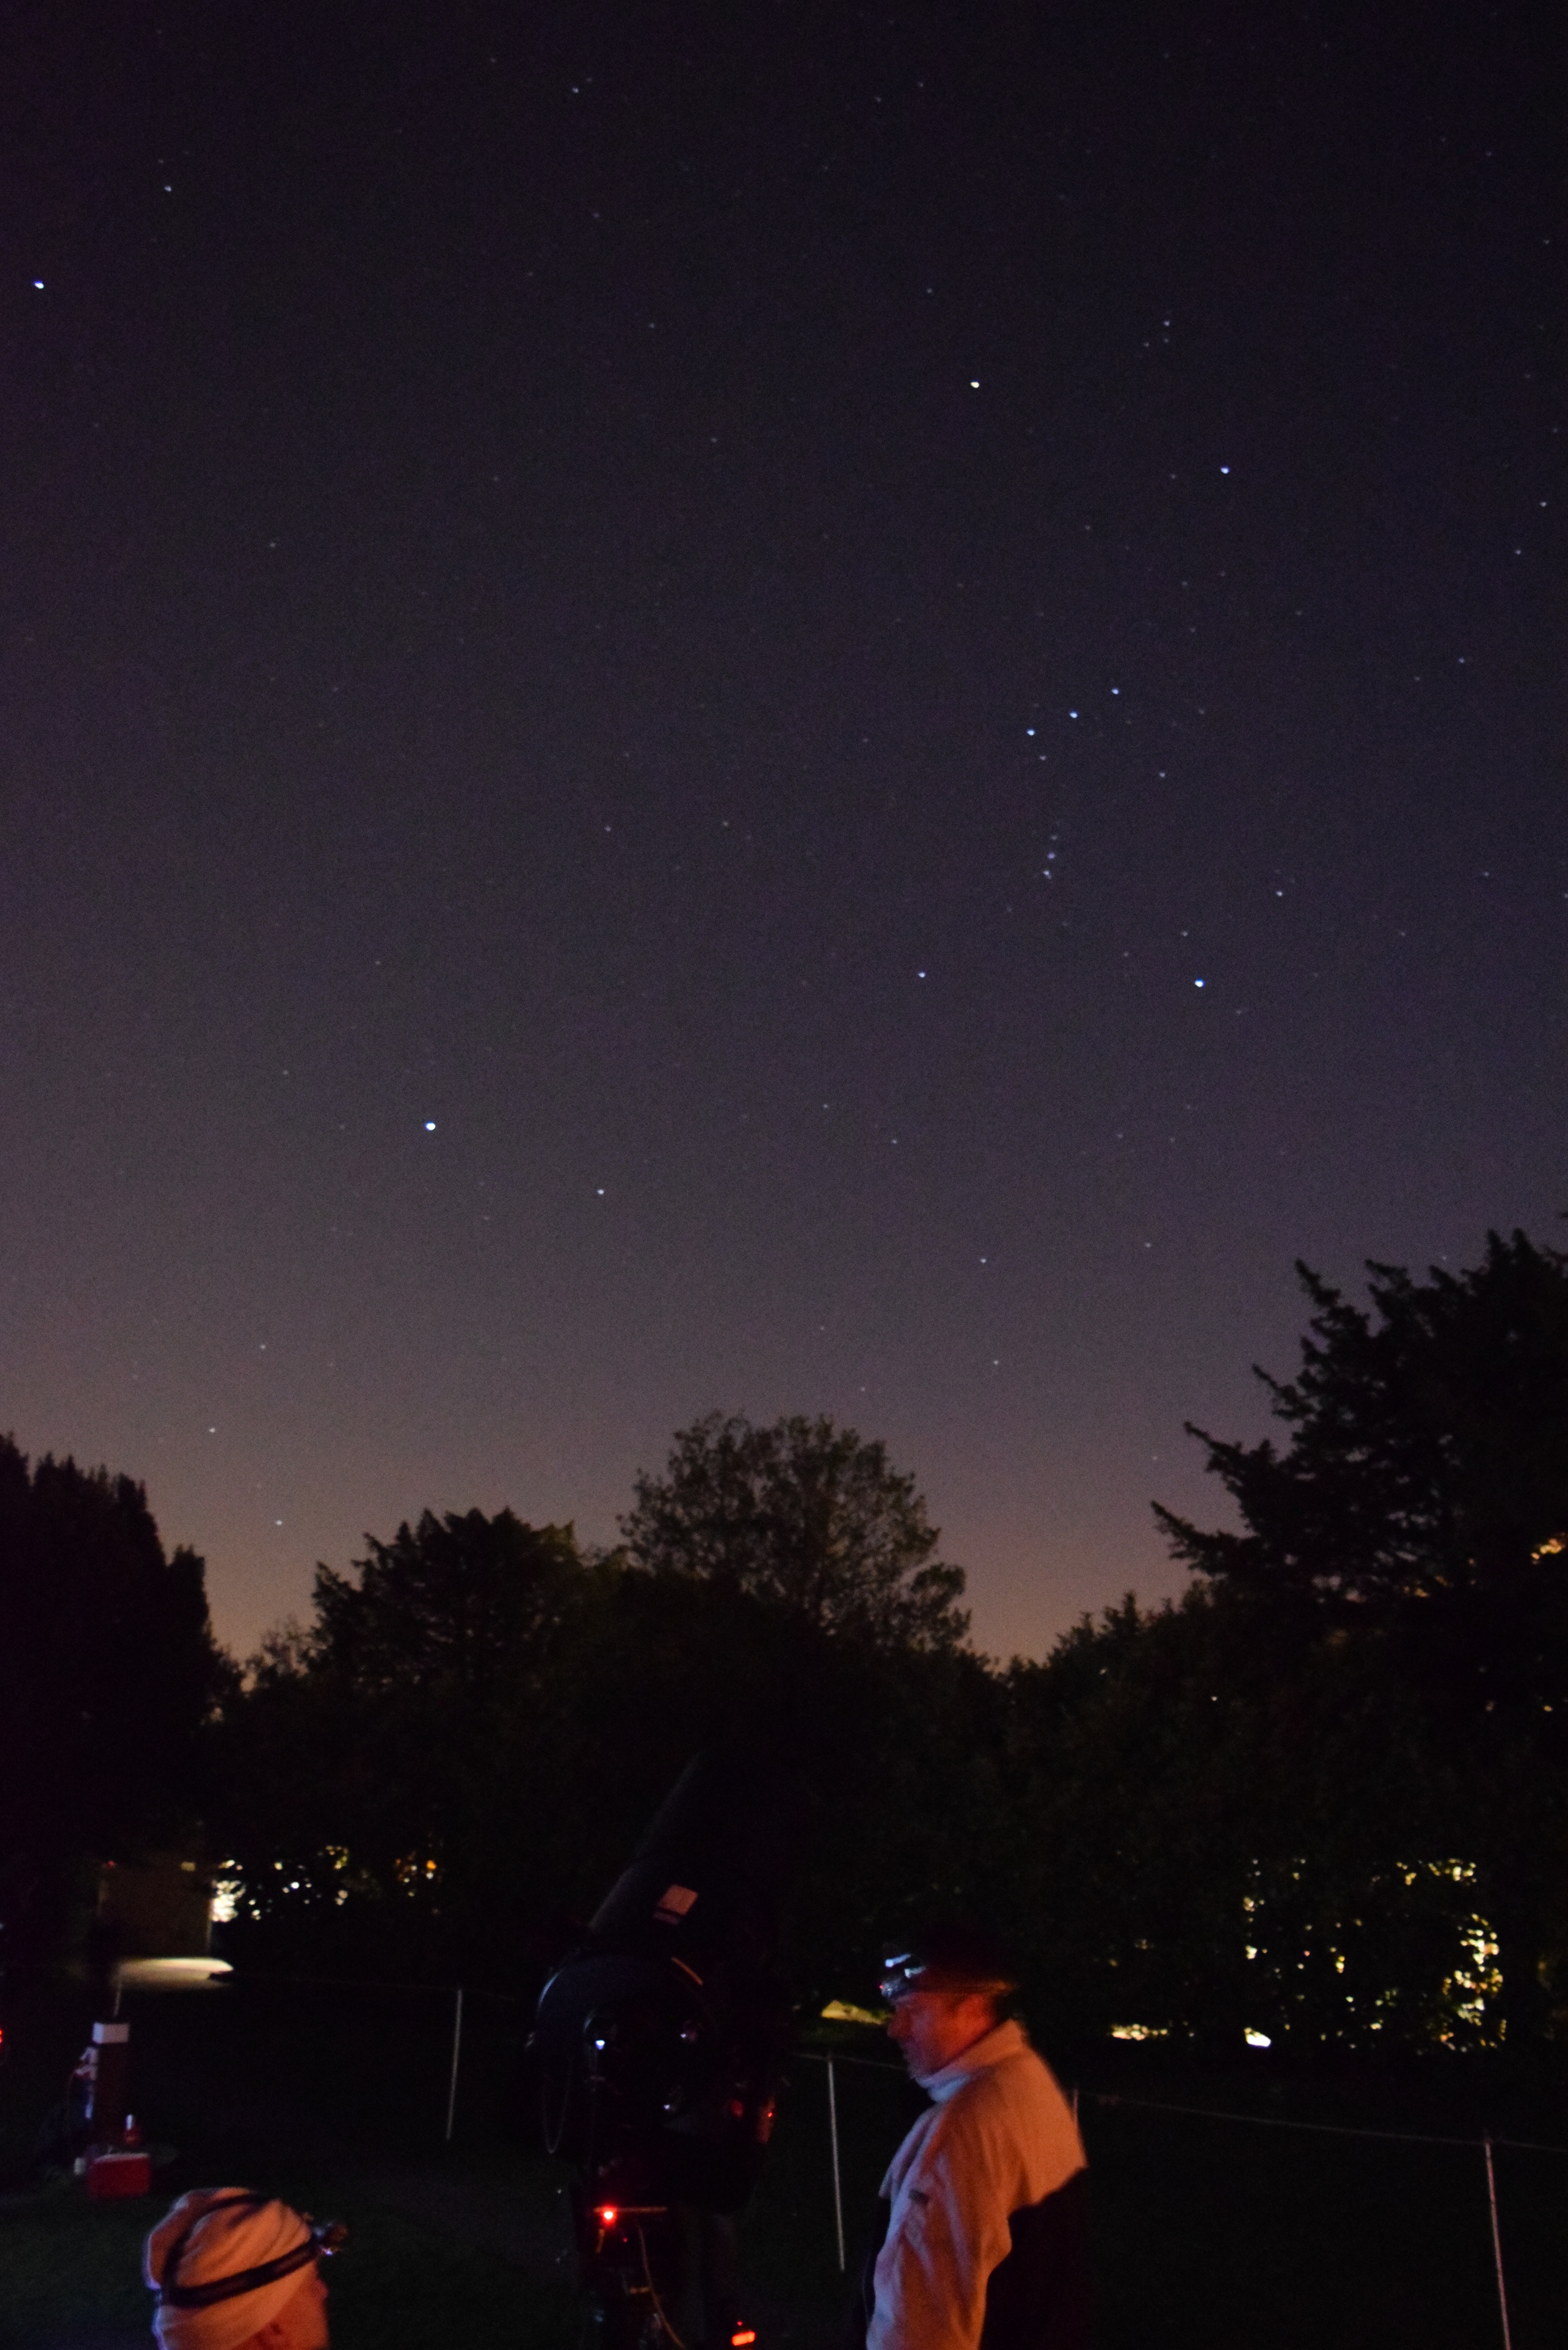 Cambridge Astronomy Association stargazing Orion and Canis Major